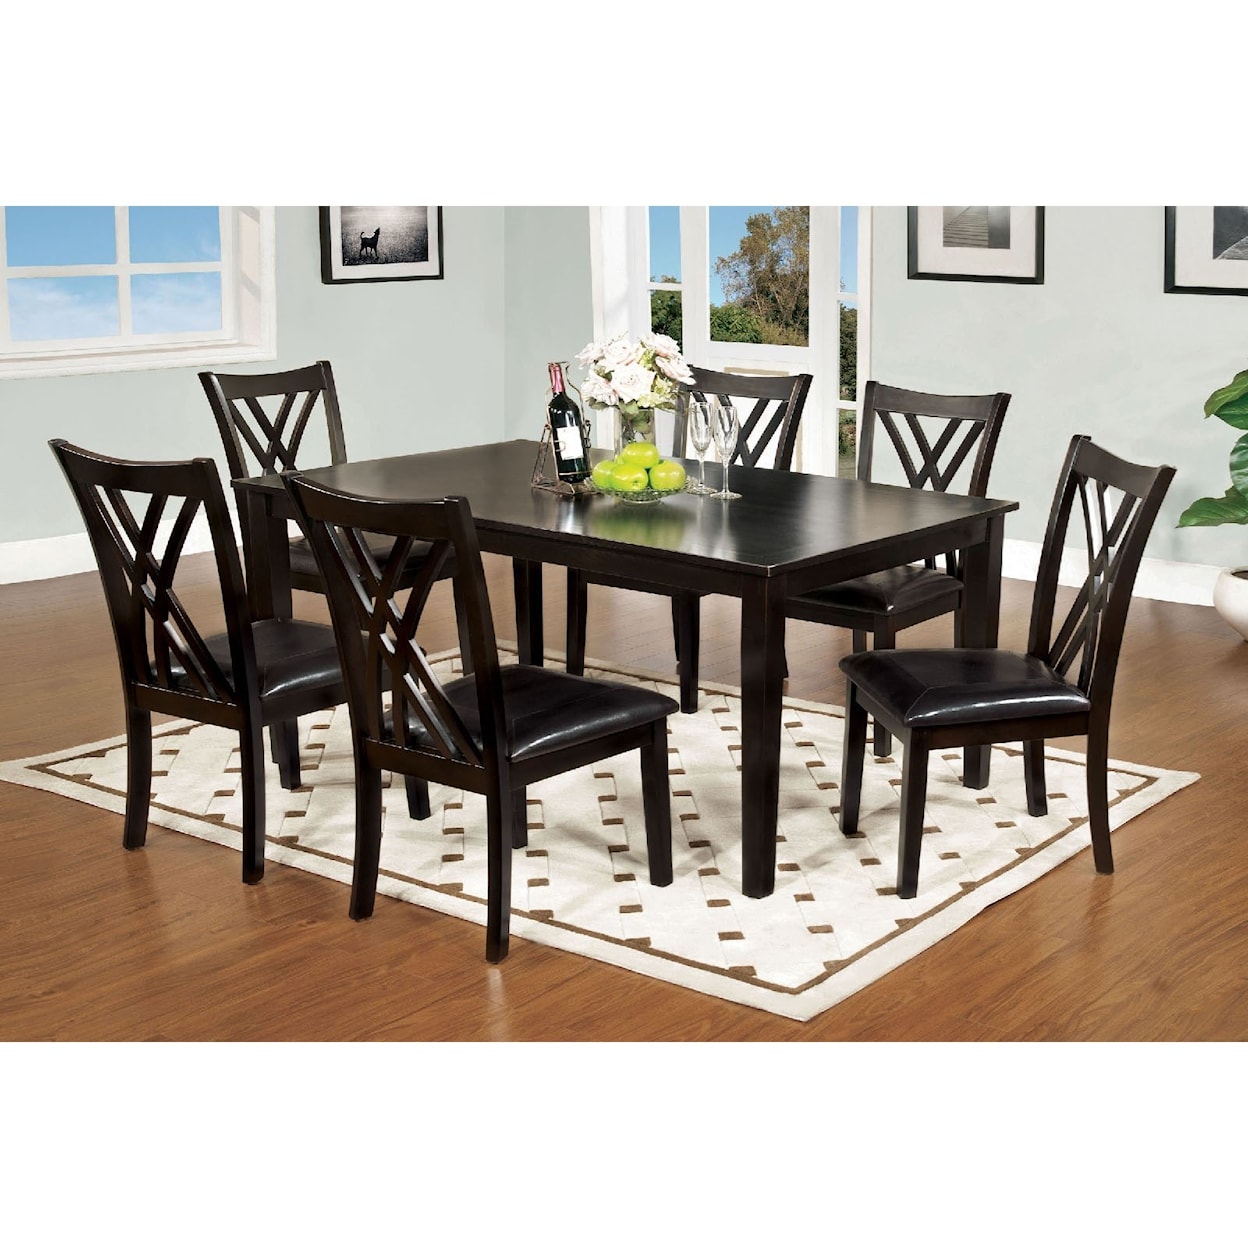 Furniture of America Springhill 5 Piece Dining Table Set